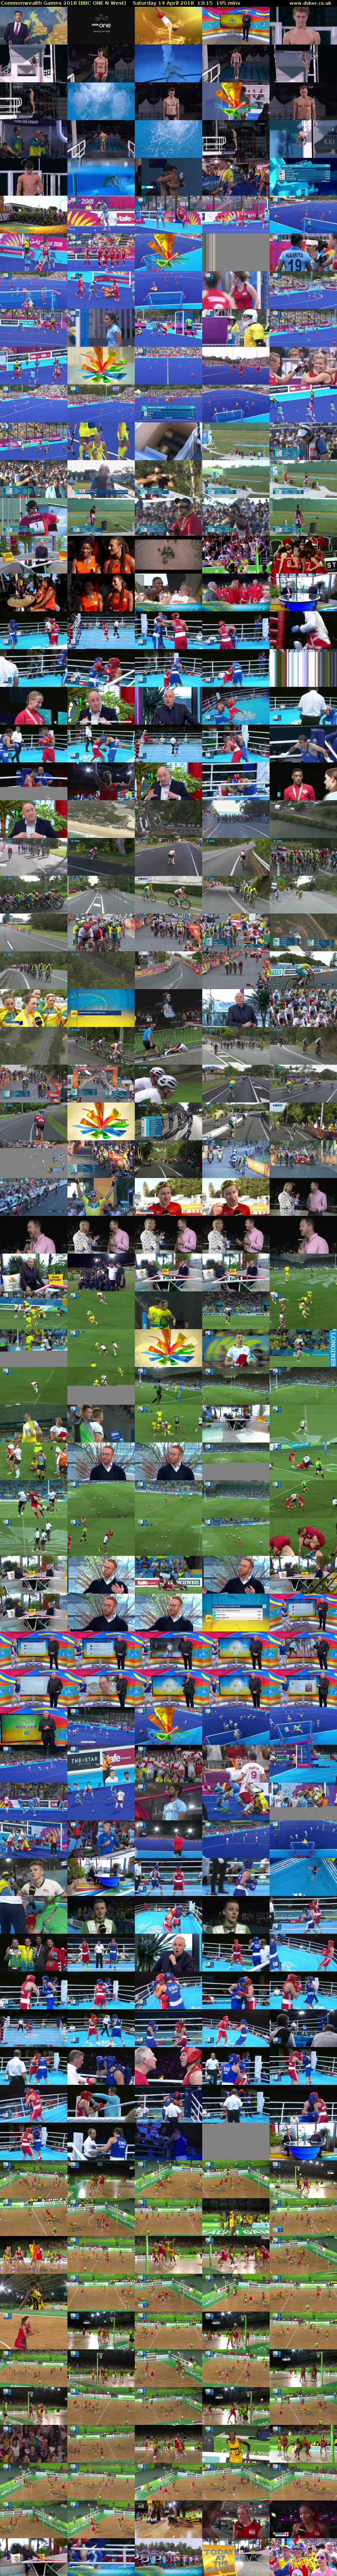 Commonwealth Games 2018 (BBC ONE N West) Saturday 14 April 2018 13:15 - 16:30